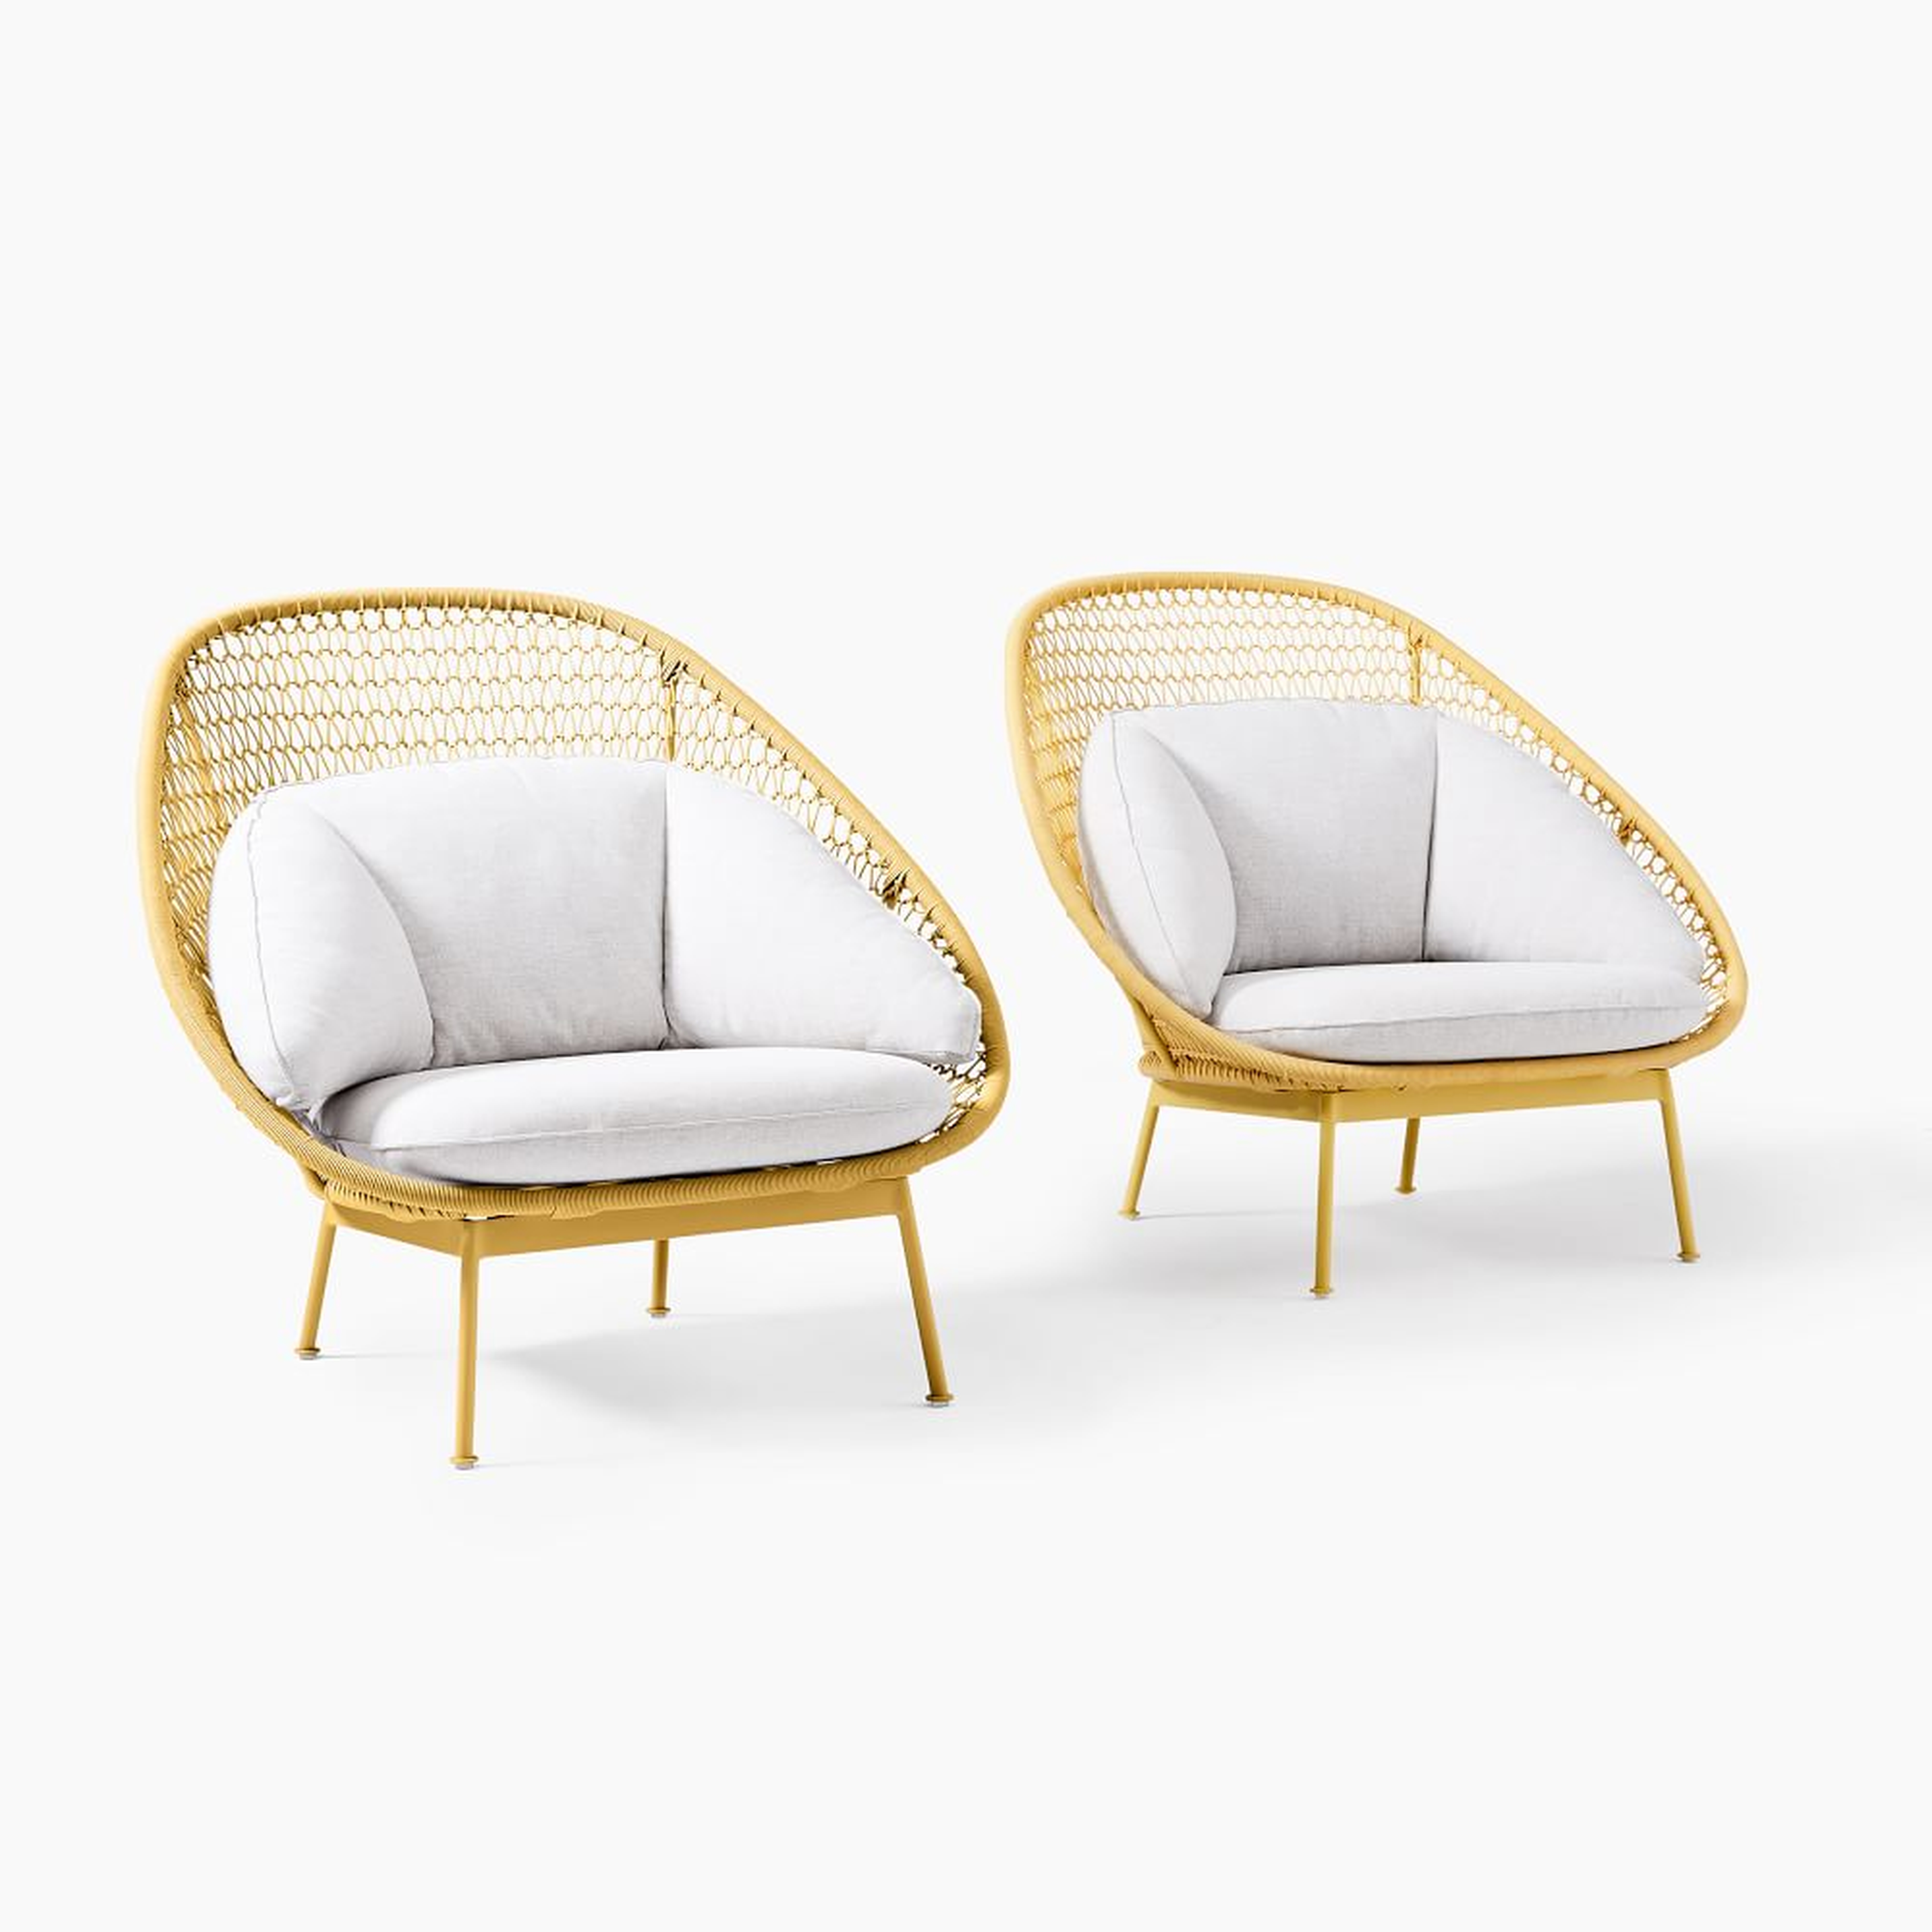 Nest Lounge Chairs, Yellow, Set of 2 - West Elm